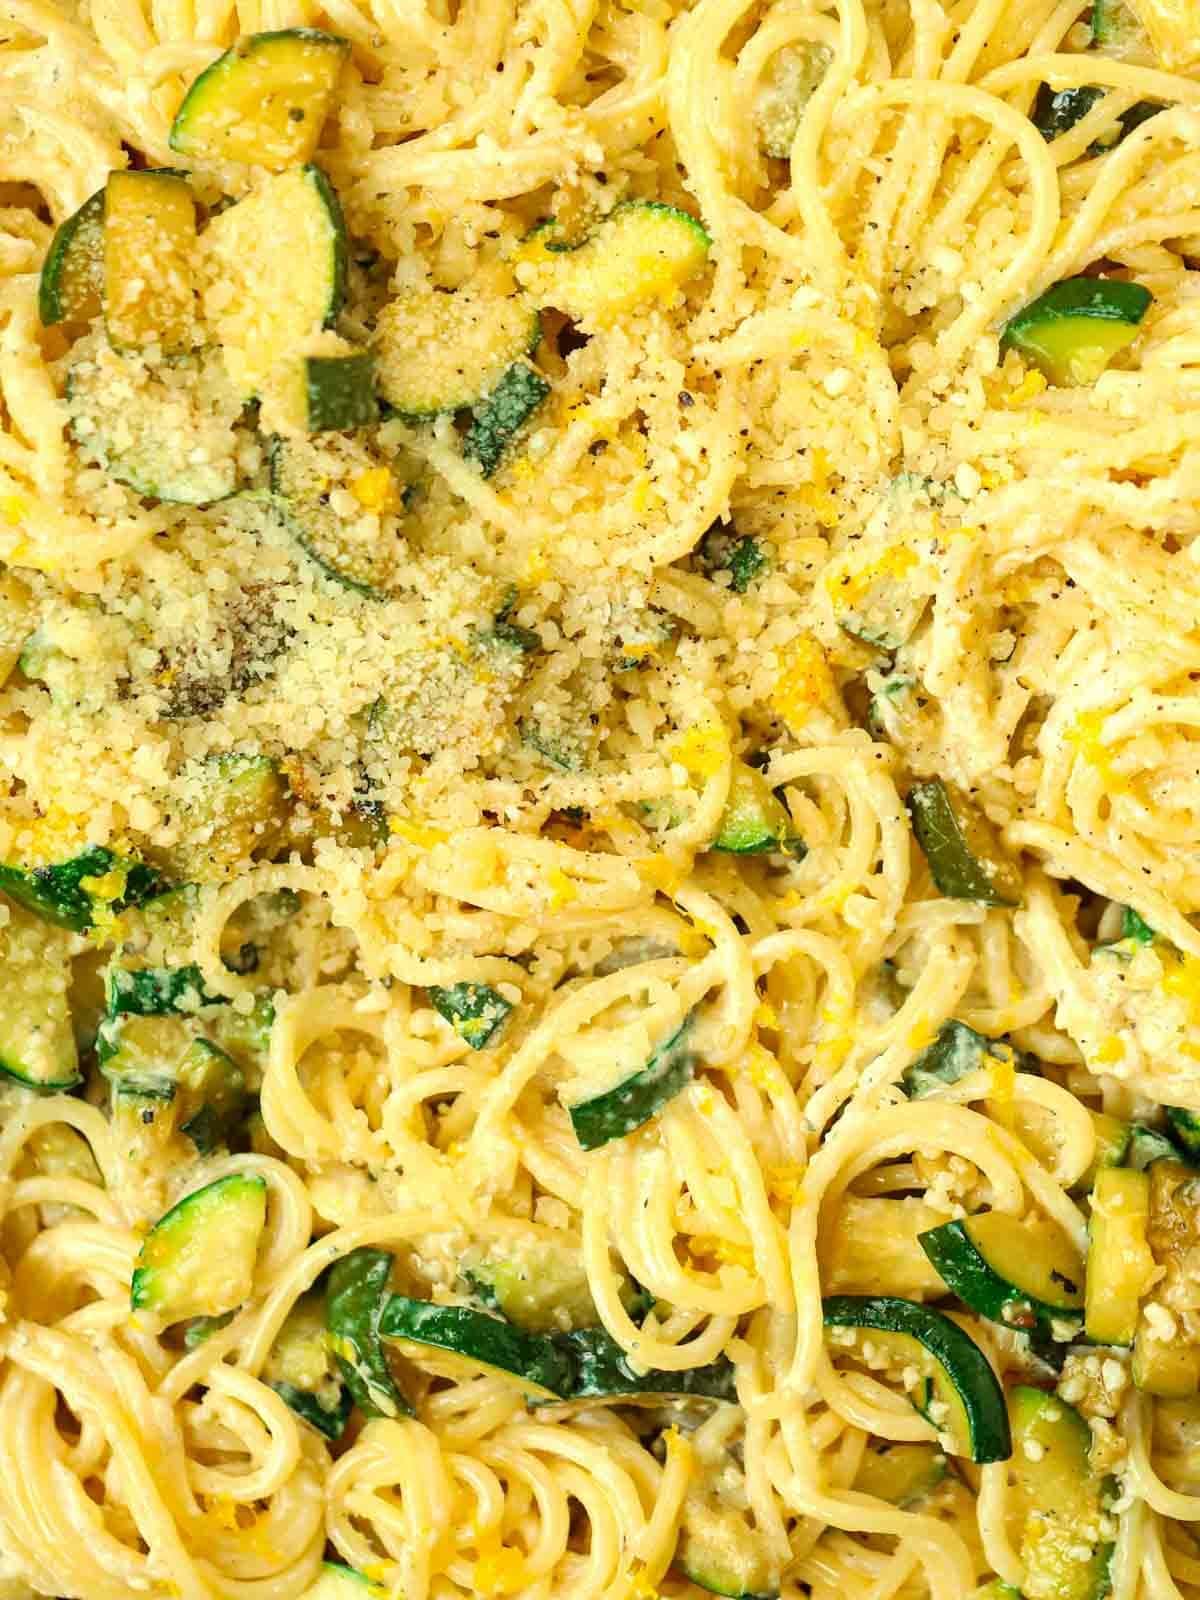 Spaghetti mixed with courgettes and parmesan for a quick dinner.